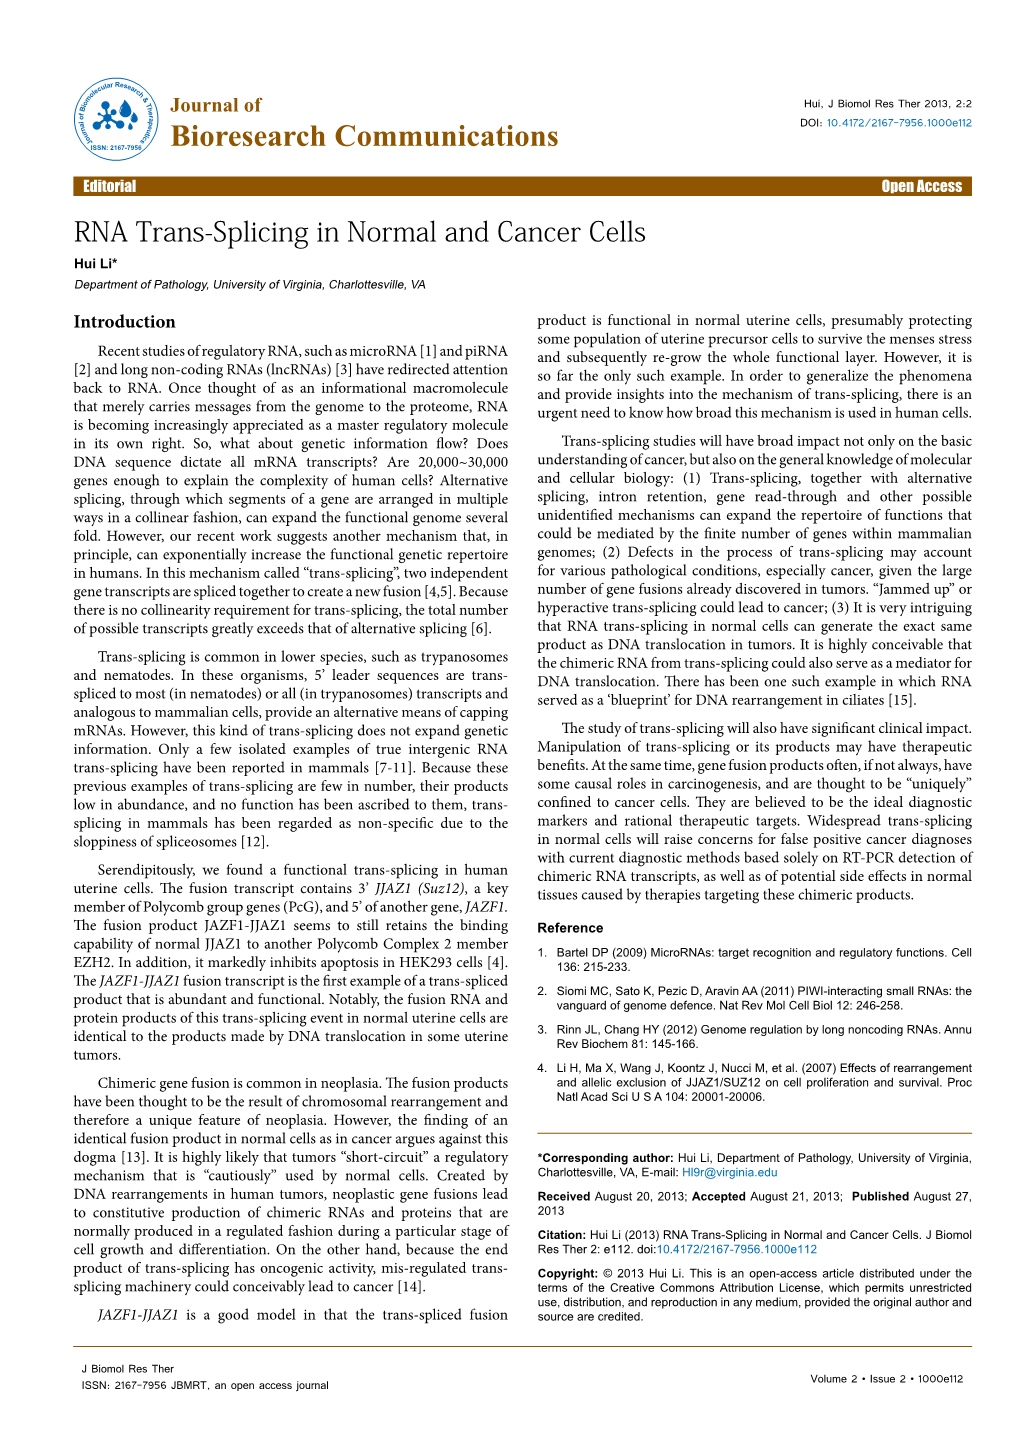 RNA Trans-Splicing in Normal and Cancer Cells Hui Li* Department of Pathology, University of Virginia, Charlottesville, VA